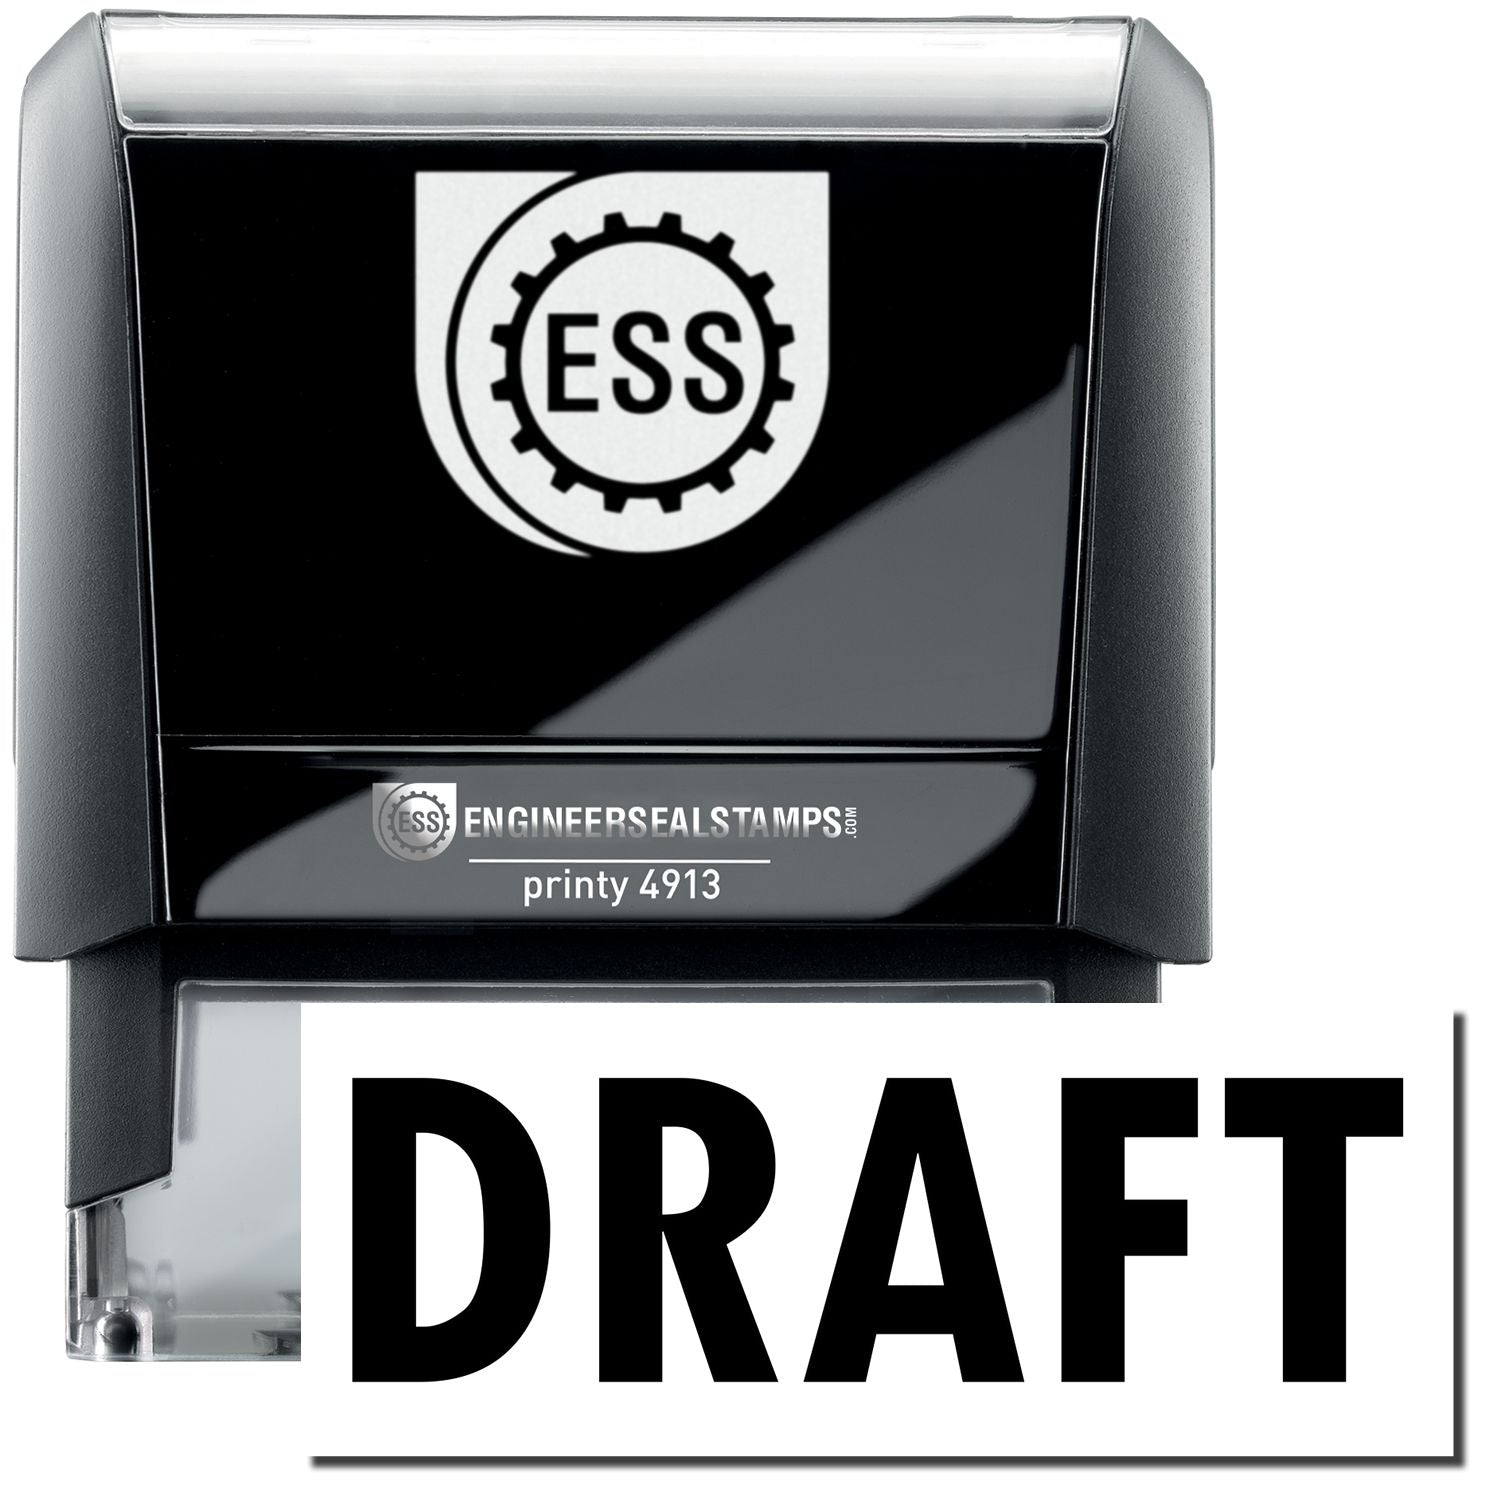 A self-inking stamp with a stamped image showing how the text "DRAFT" in a large bold font is displayed by it.